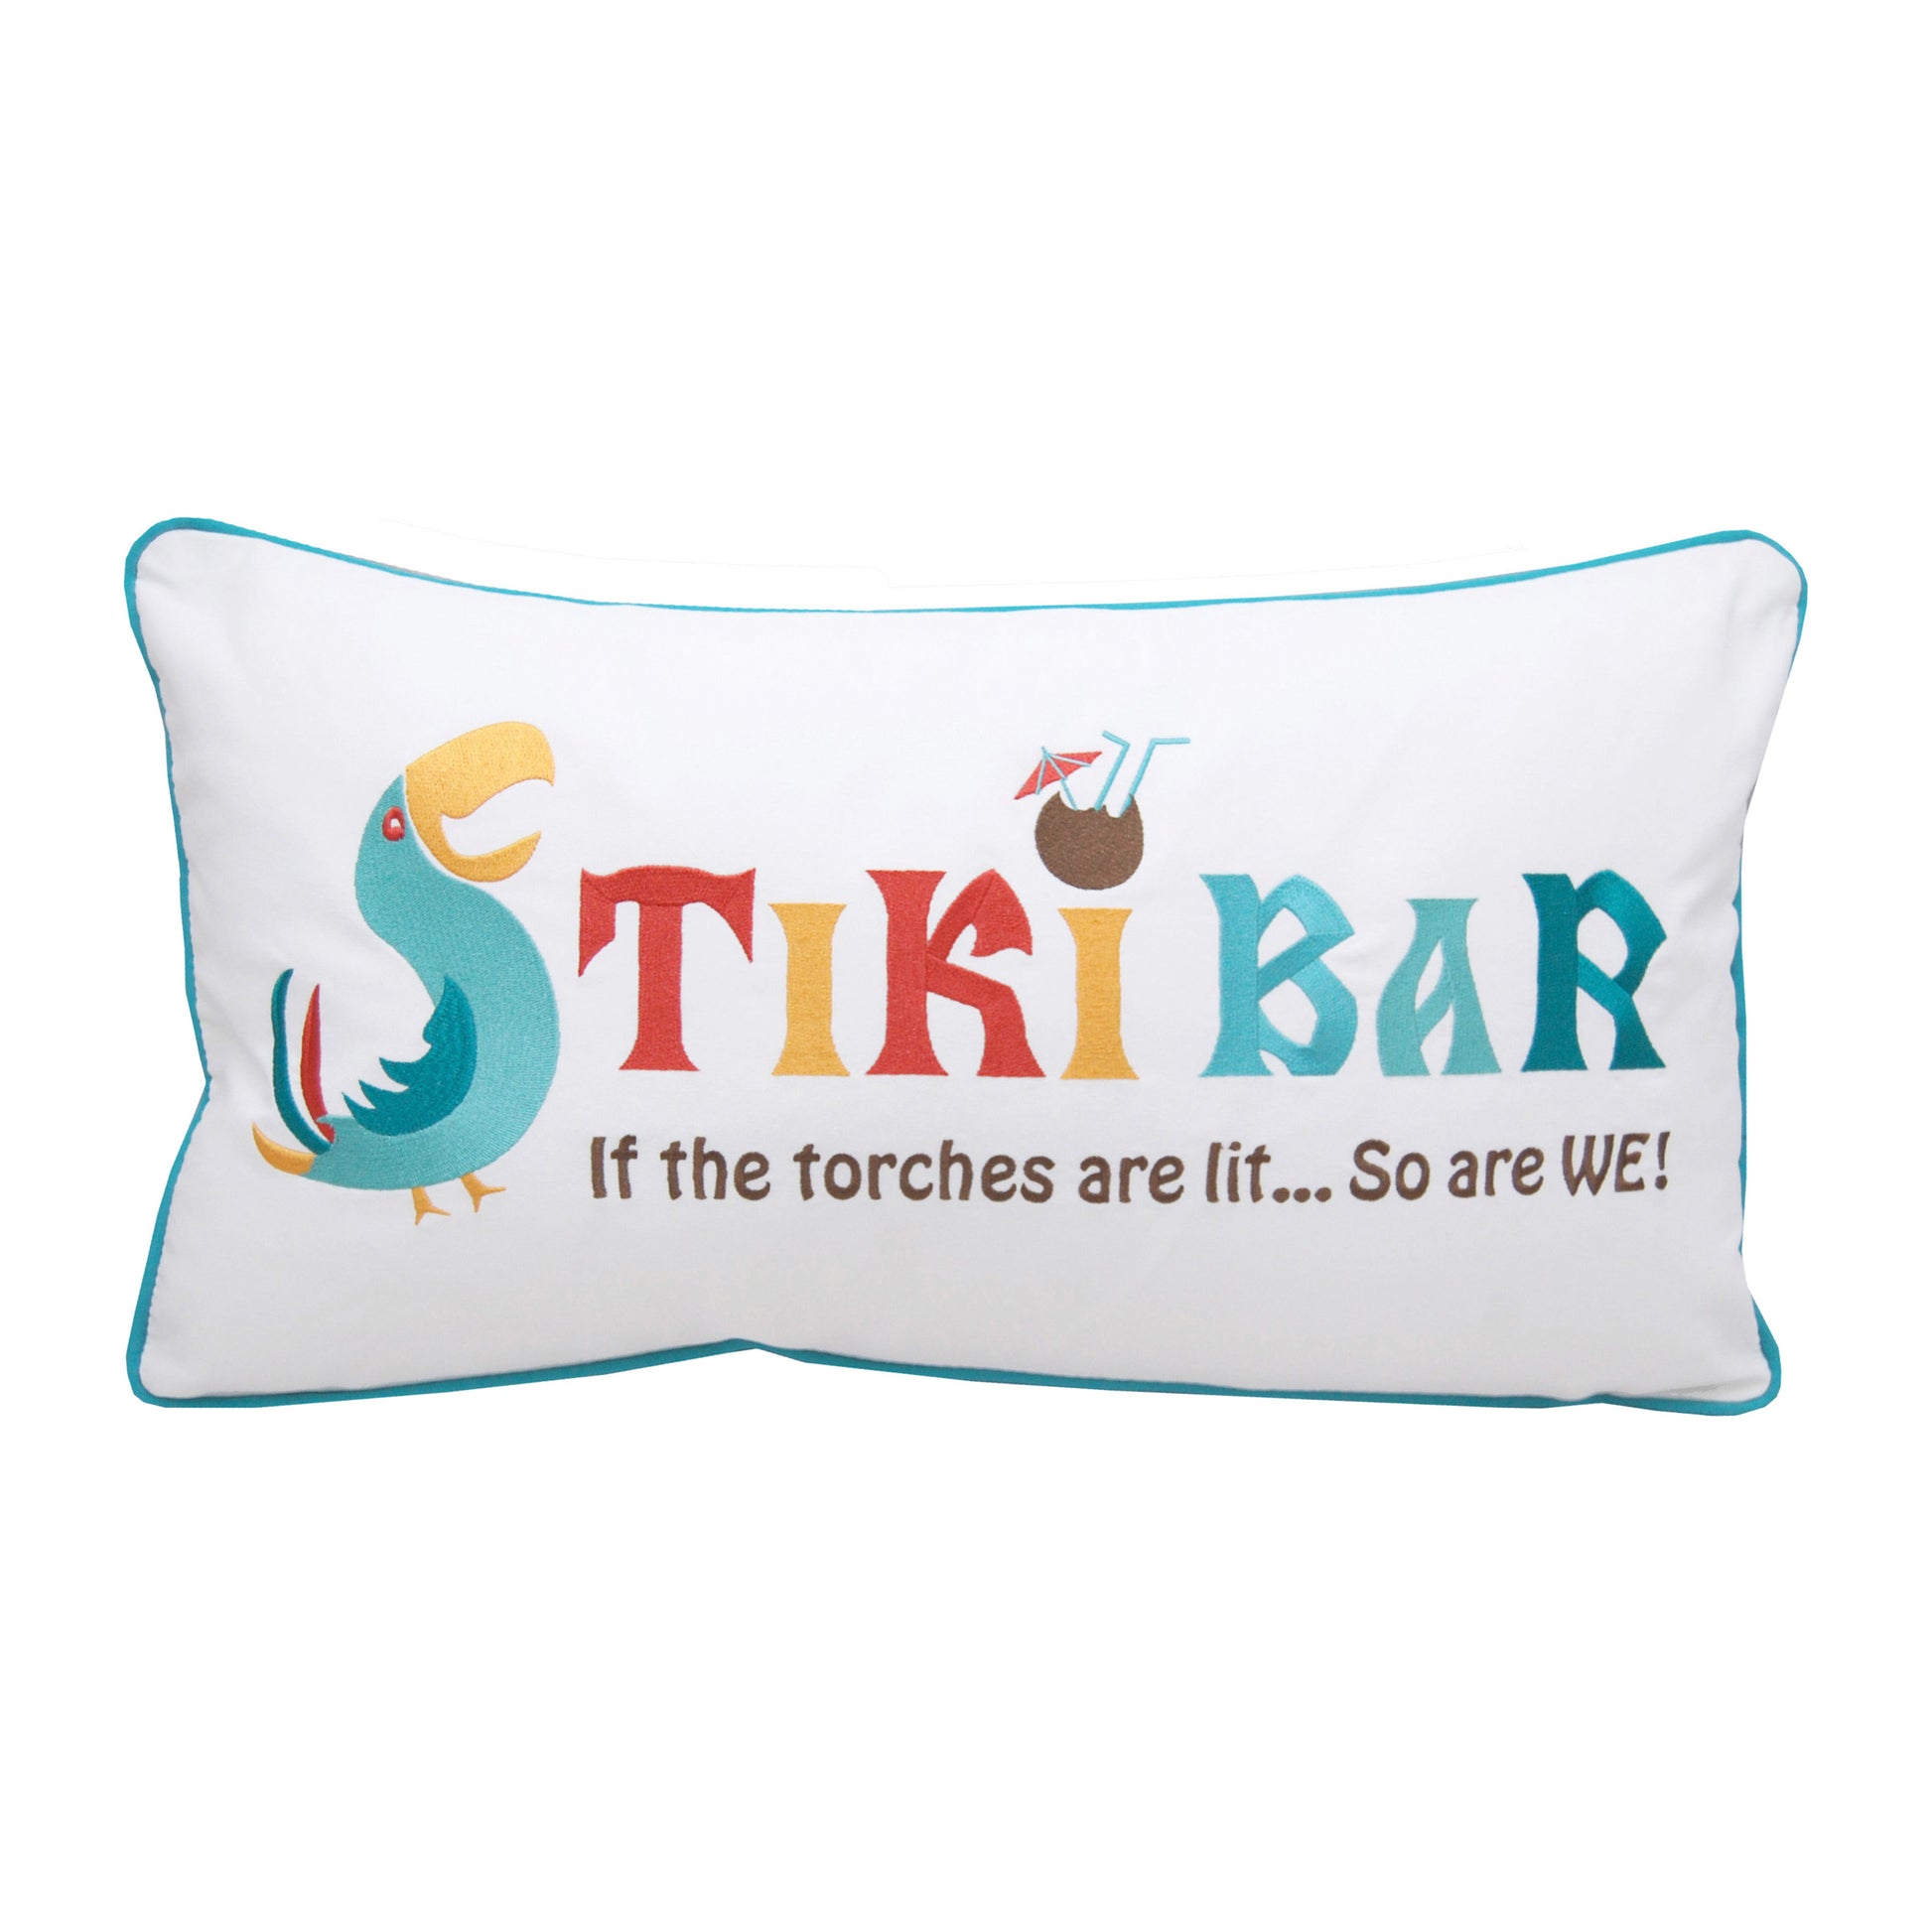 Embroidered lumbar pillow featuring the saying: Tiki Bar, If The Torches Are Lit... So Are WE! in red, yellow, and blue hues.